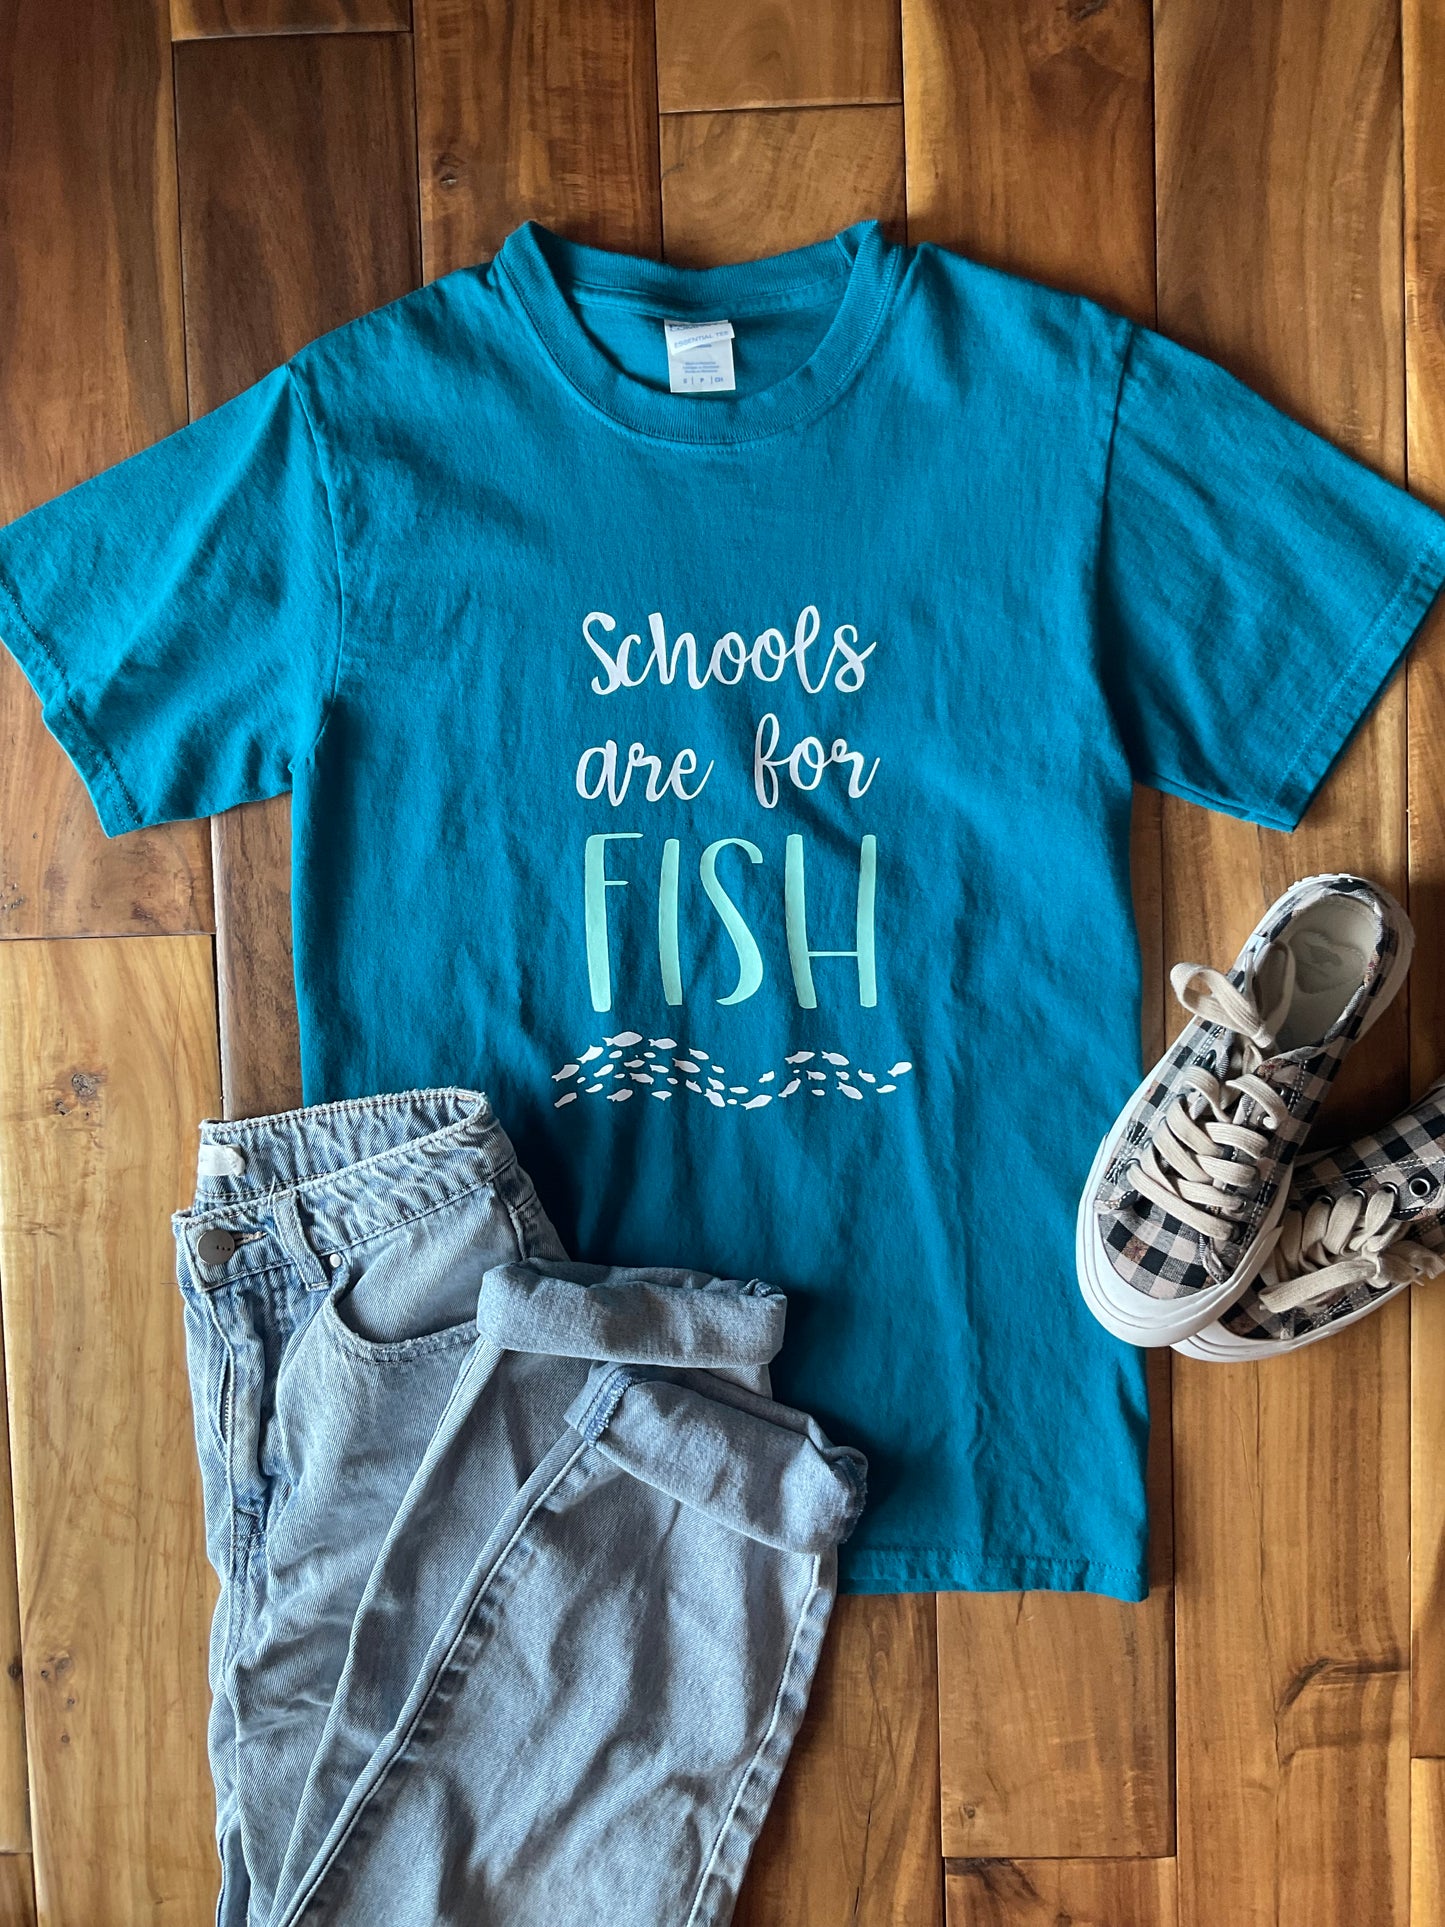 Schools are for Fish T-Shirt